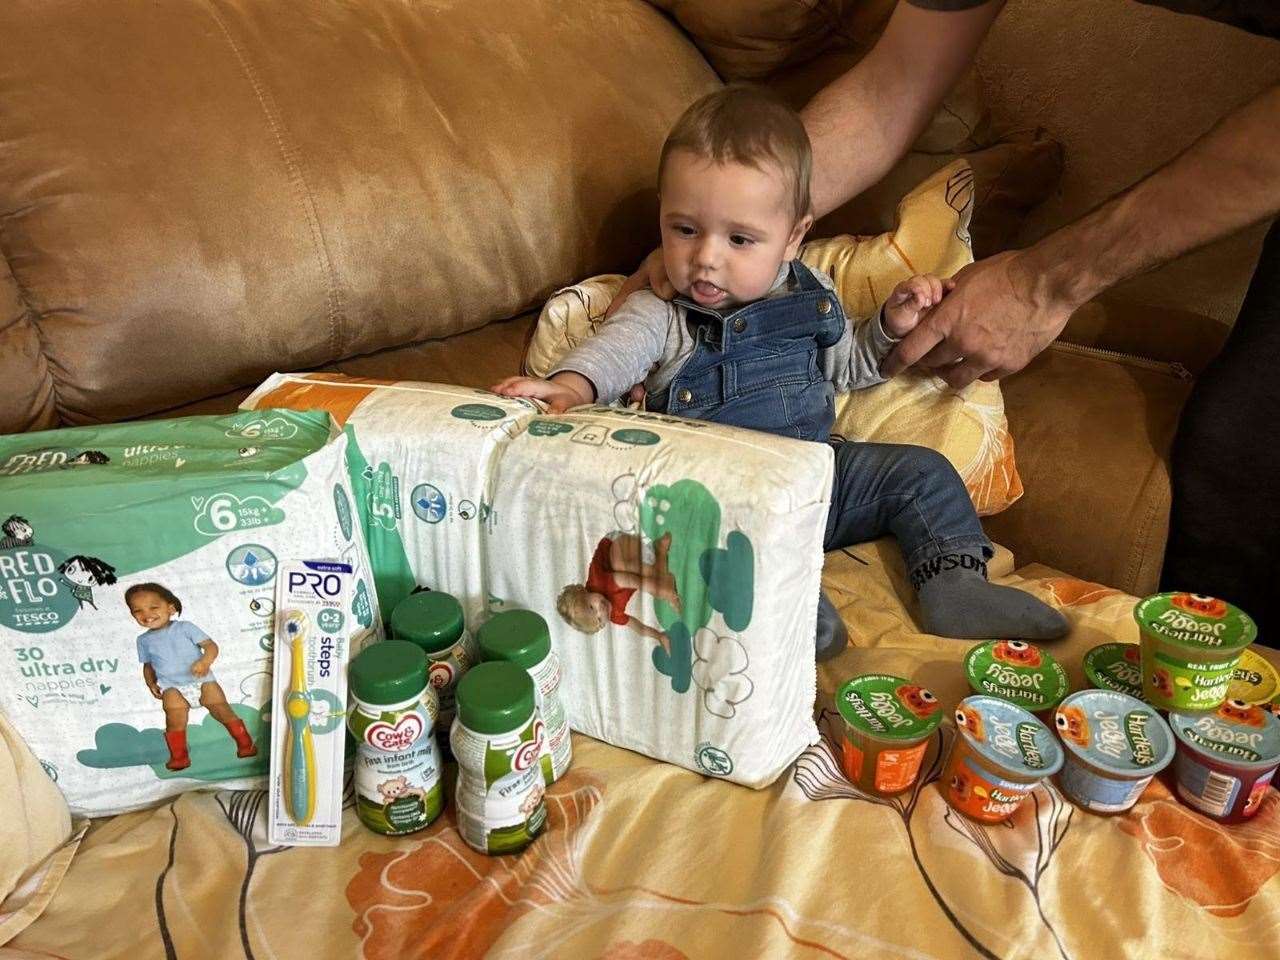 Donated items from the Highlands are reaching babies and children in Ukraine.